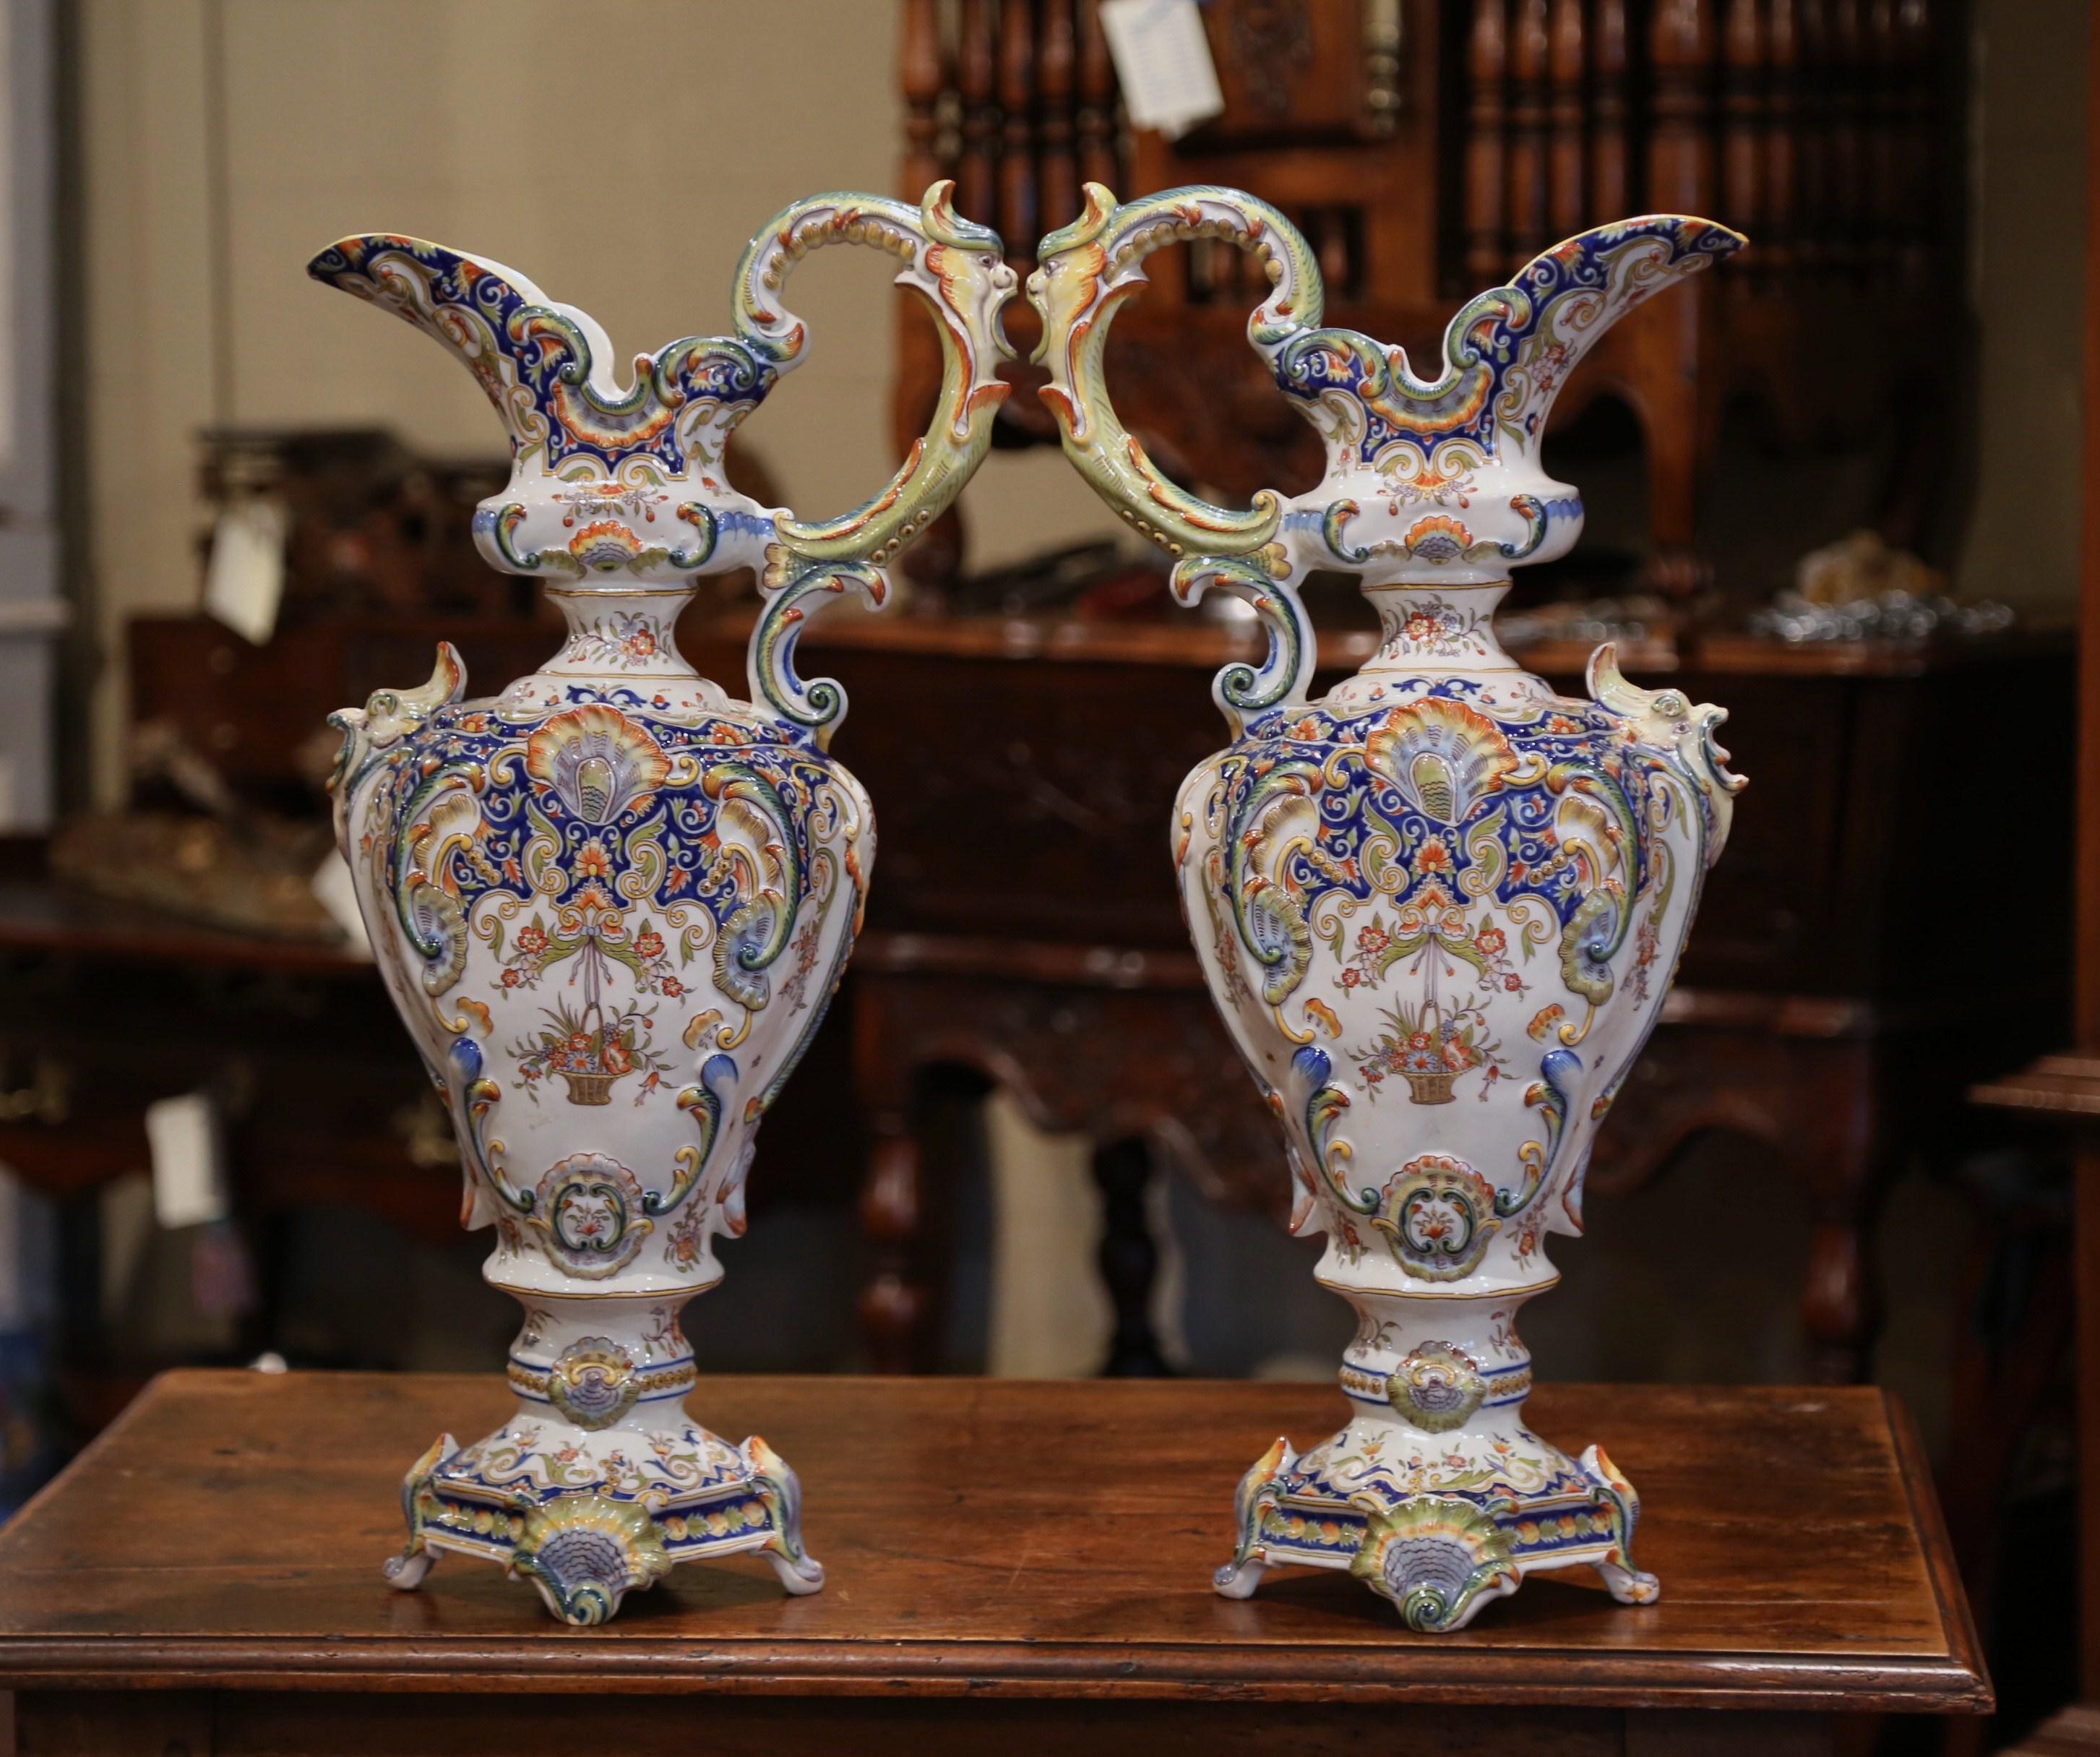 Ceramic Pair of 19th Century French Hand Painted Faience Ewers Jars from Rouen